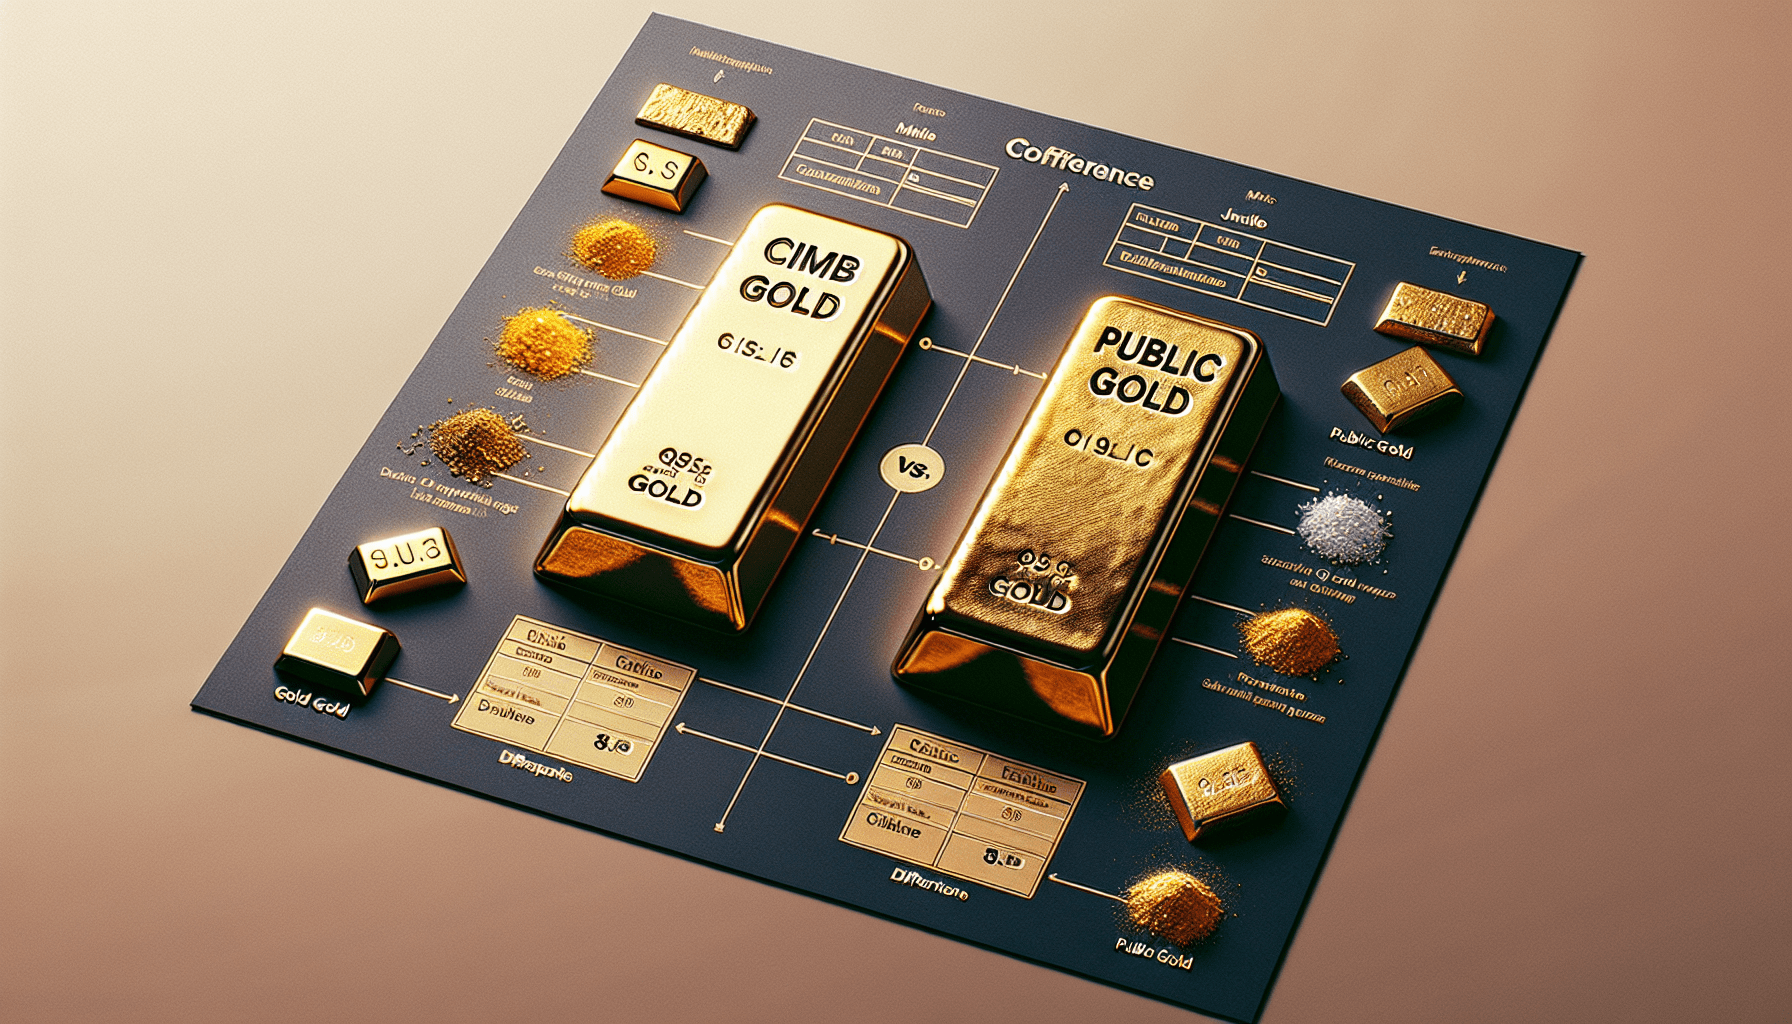 What Is The Difference Between CIMB Gold And Public Gold?